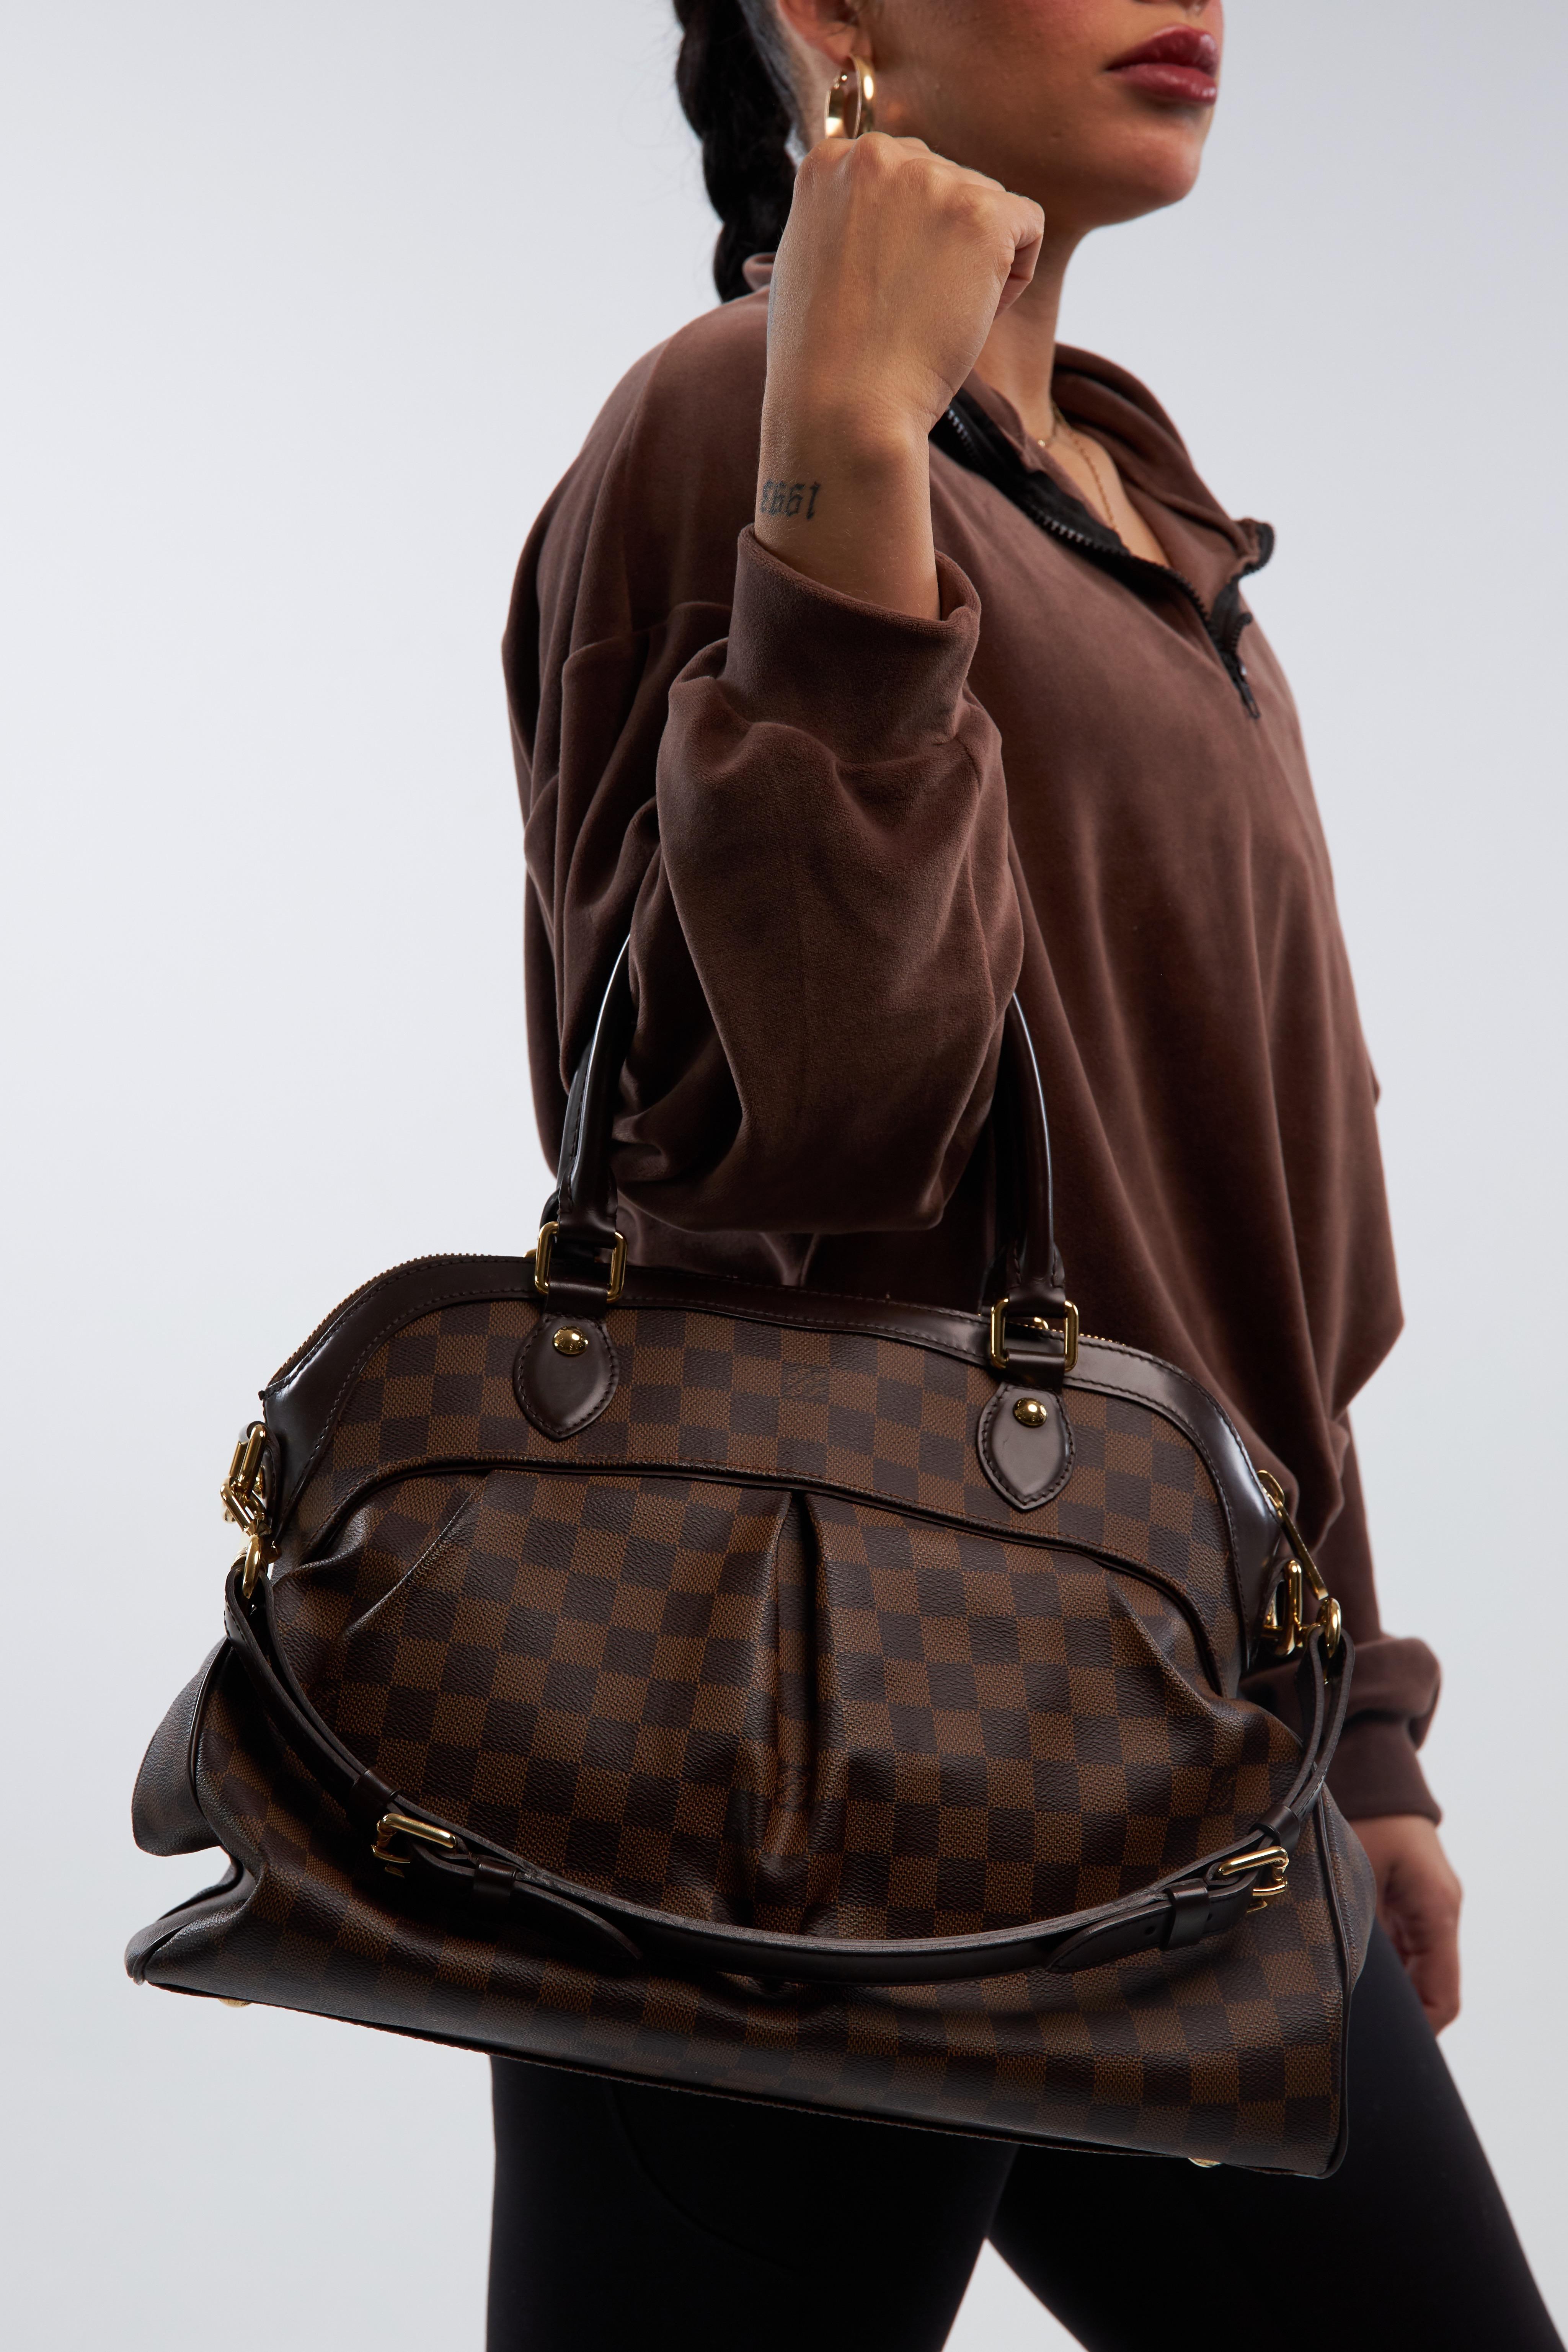 This bag is named after the glorious Trevi Fountain in Rome. The bag is made of signature Louis Vuitton damier ebene coated canvas. The bag features chocolate brown leather trim, dual rolled leather top handles, an optional adjustable shoulder